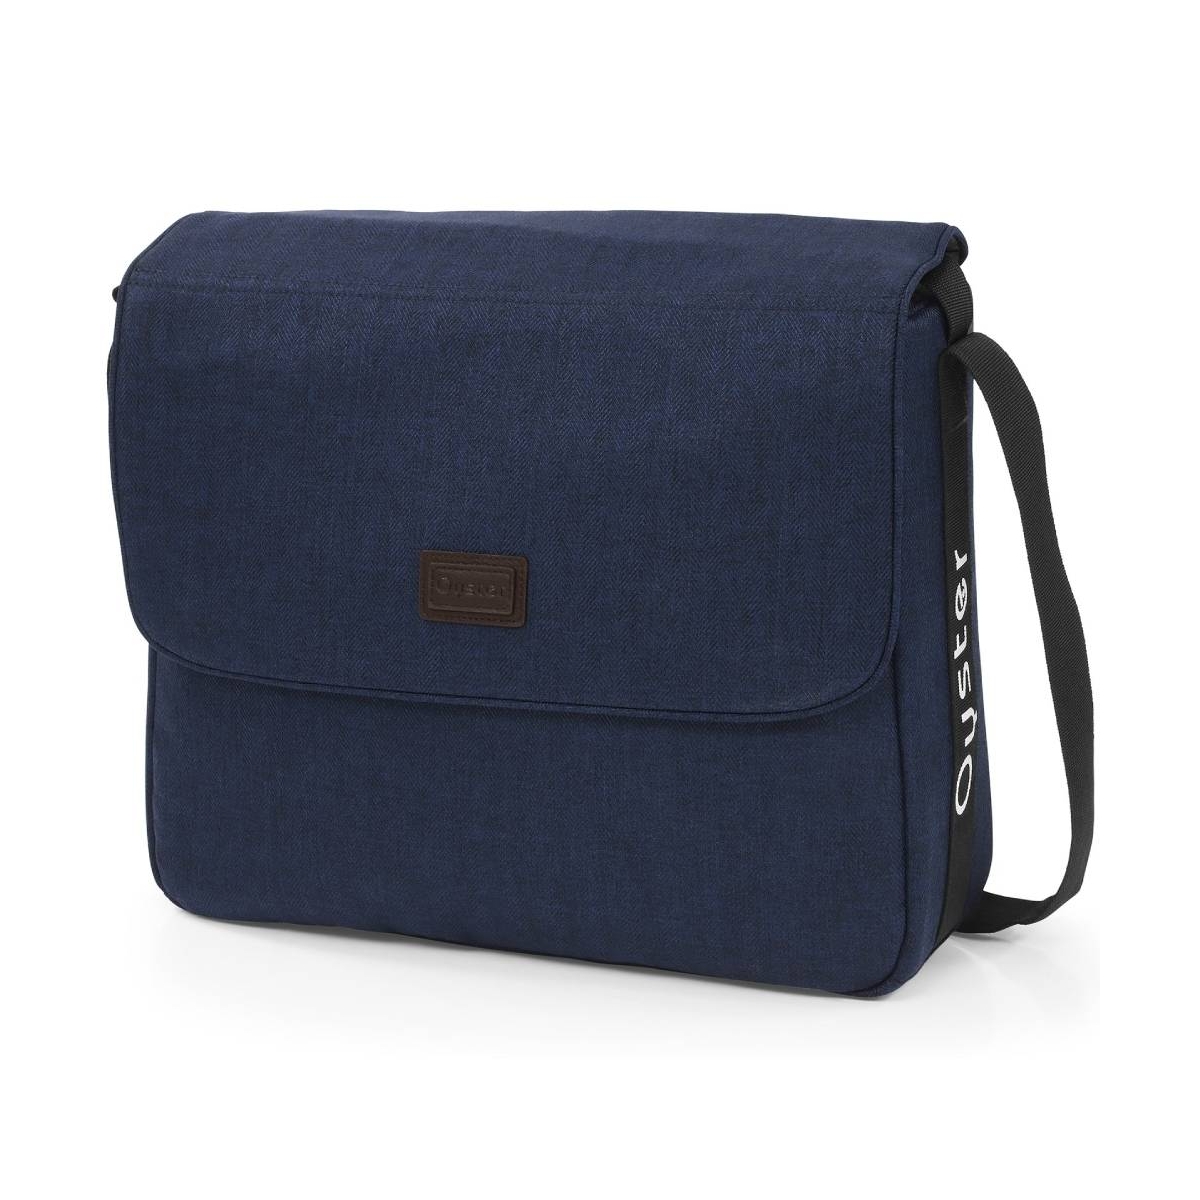 Babystyle Oyster 3 Changing Bag